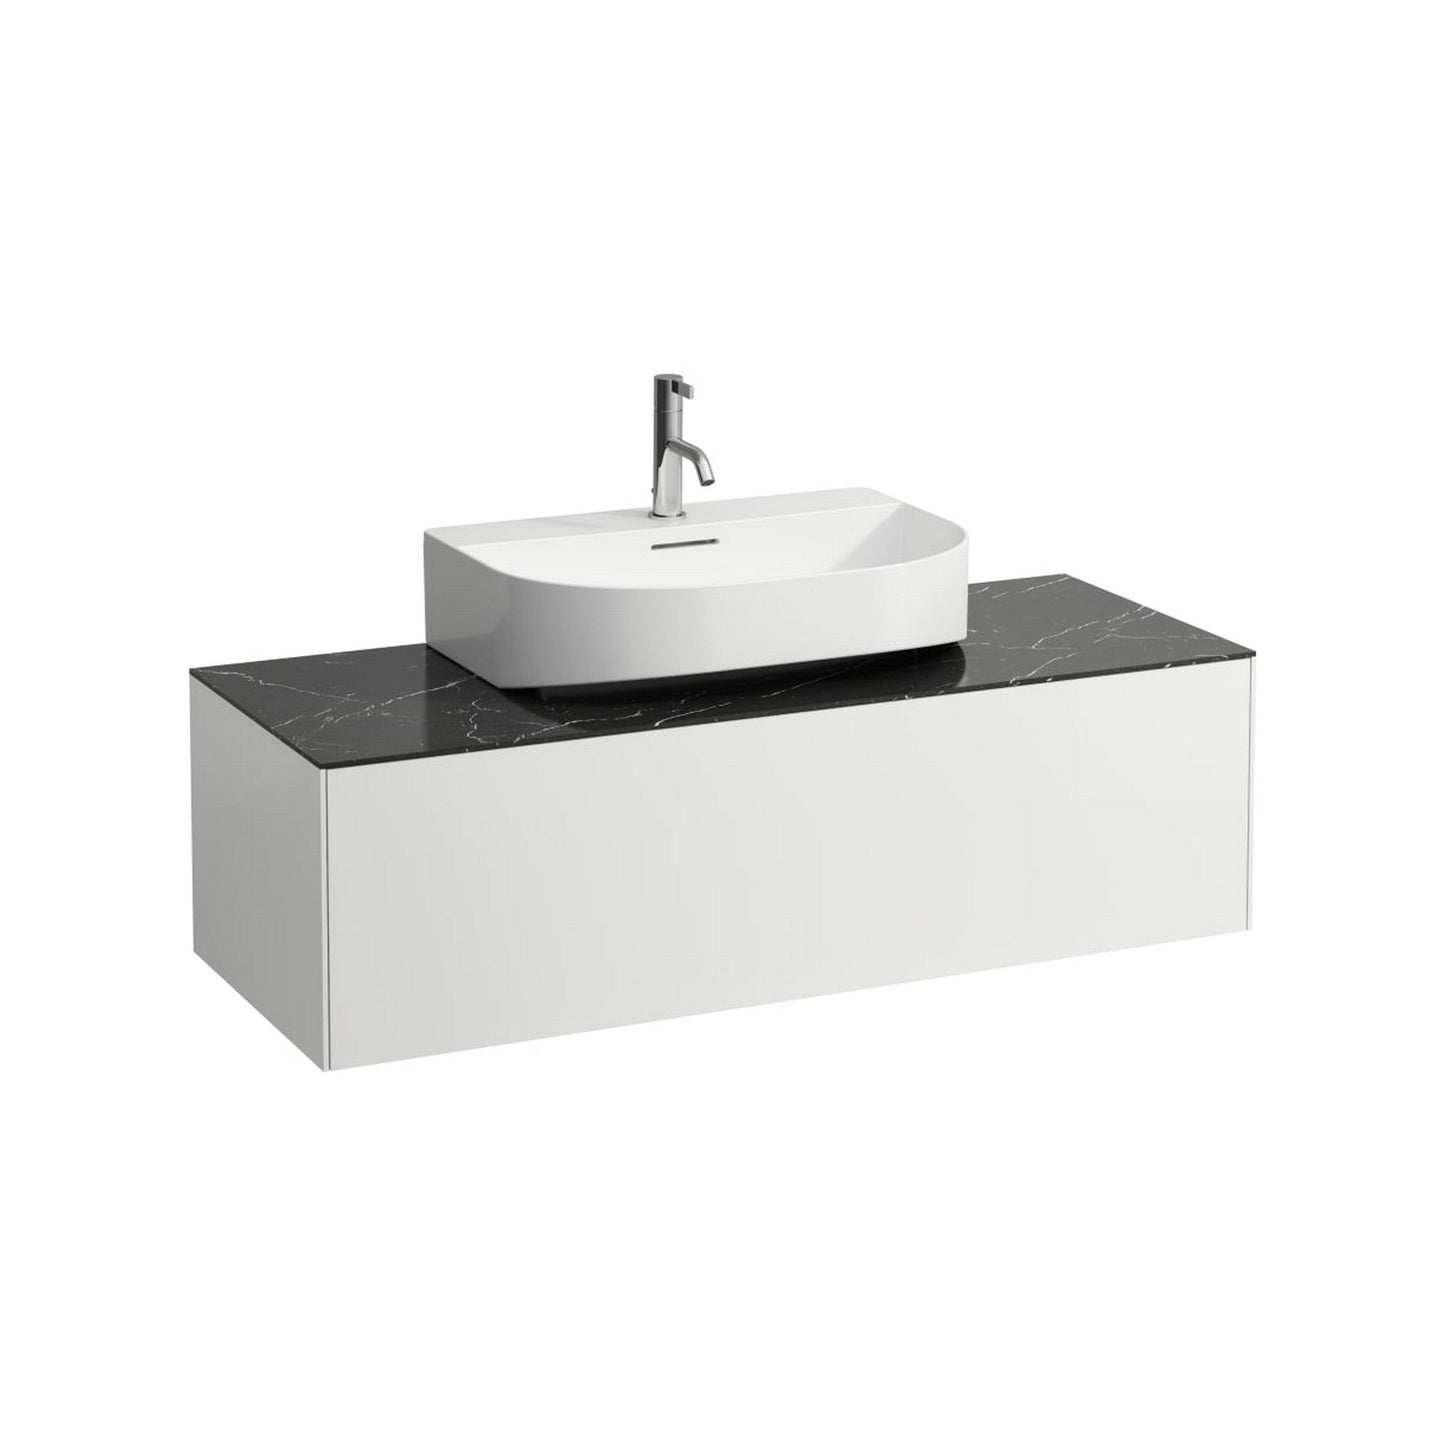 Laufen Sonar 24" White Ceramic Countertop Bathroom Sink With With Faucet Hole